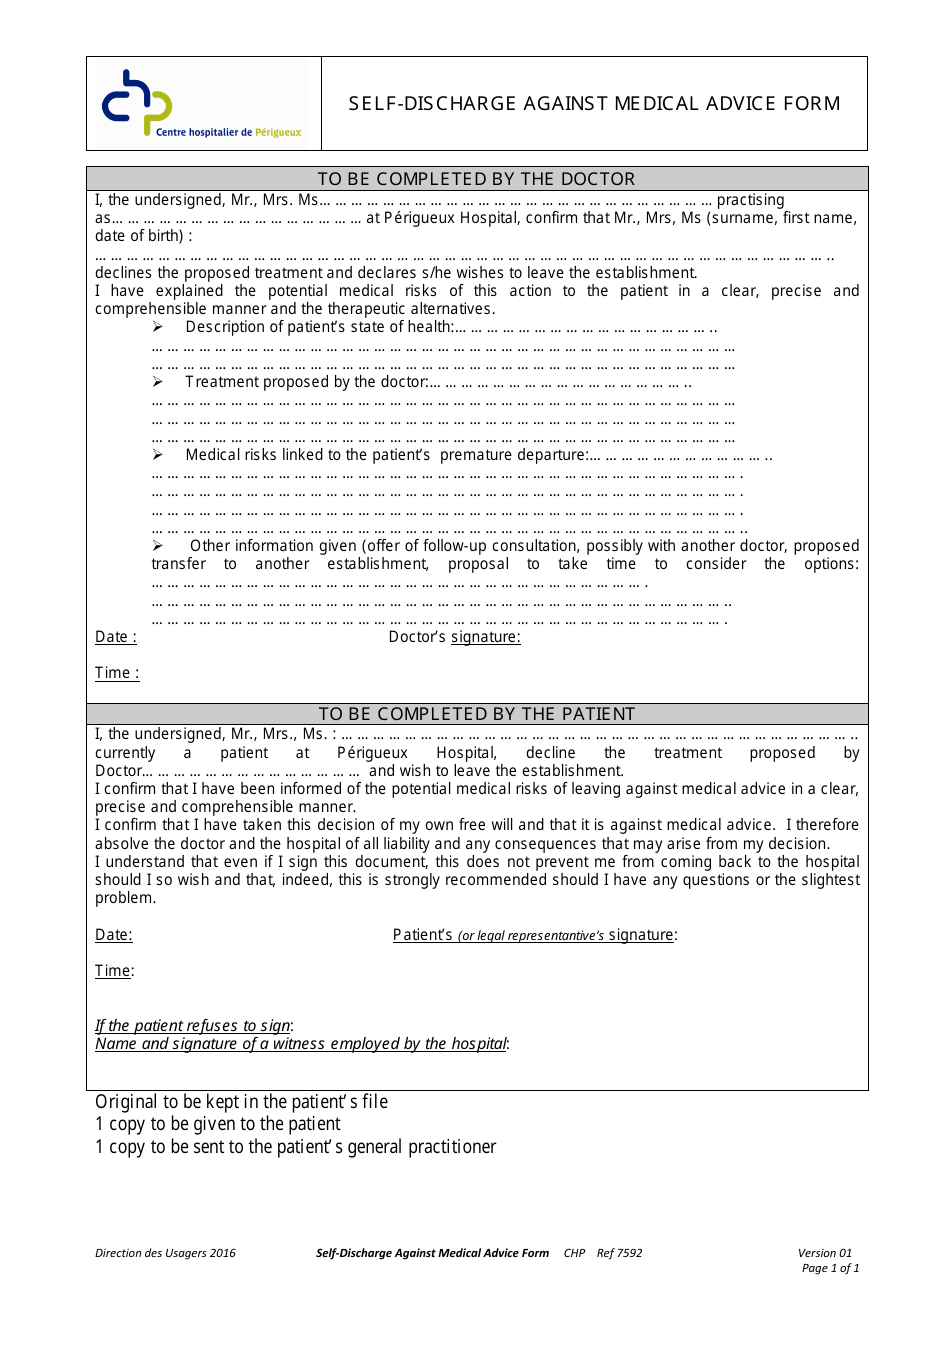 Self-discharge Against Medical Advice Form - Centre Hospitalier Perigueux, Page 1